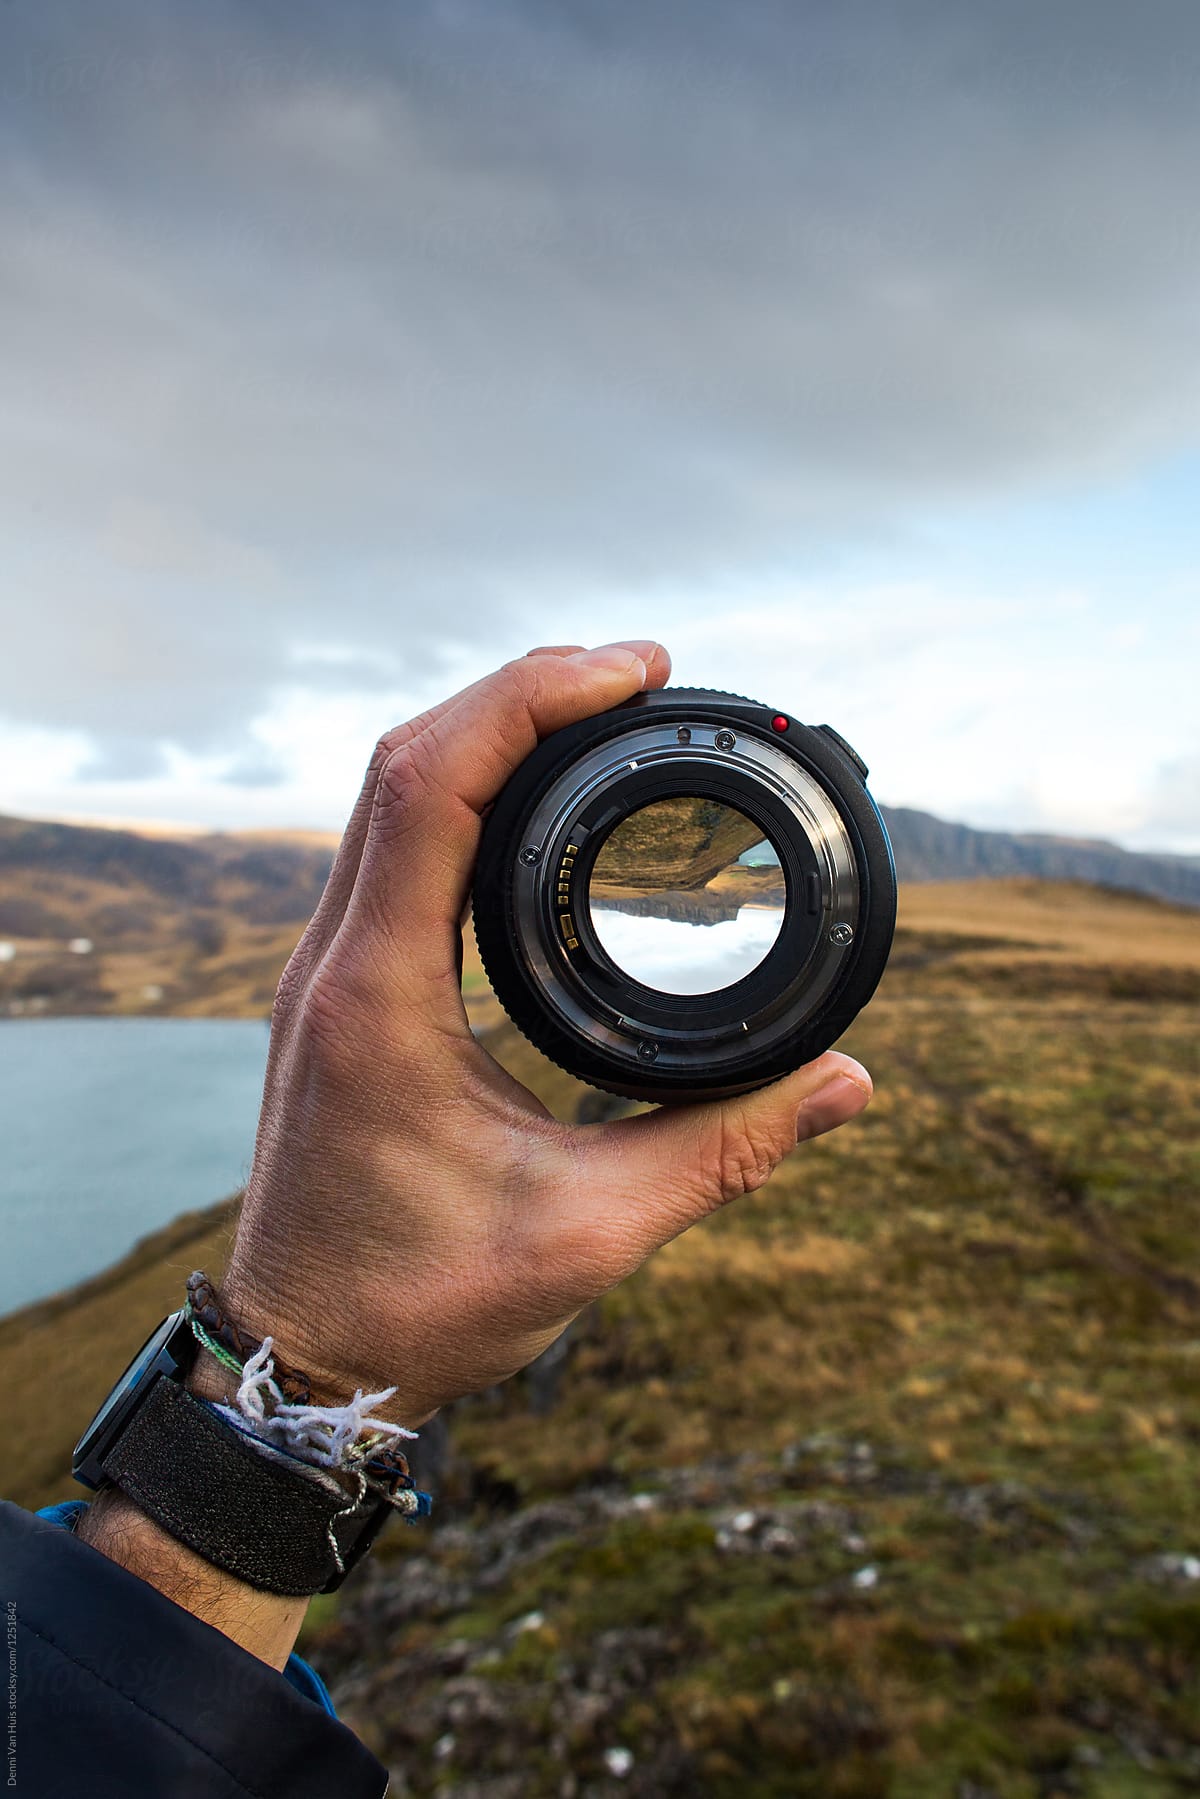 Hand holding up a camera lens and looks through it surrounded by a beautiful landscape.